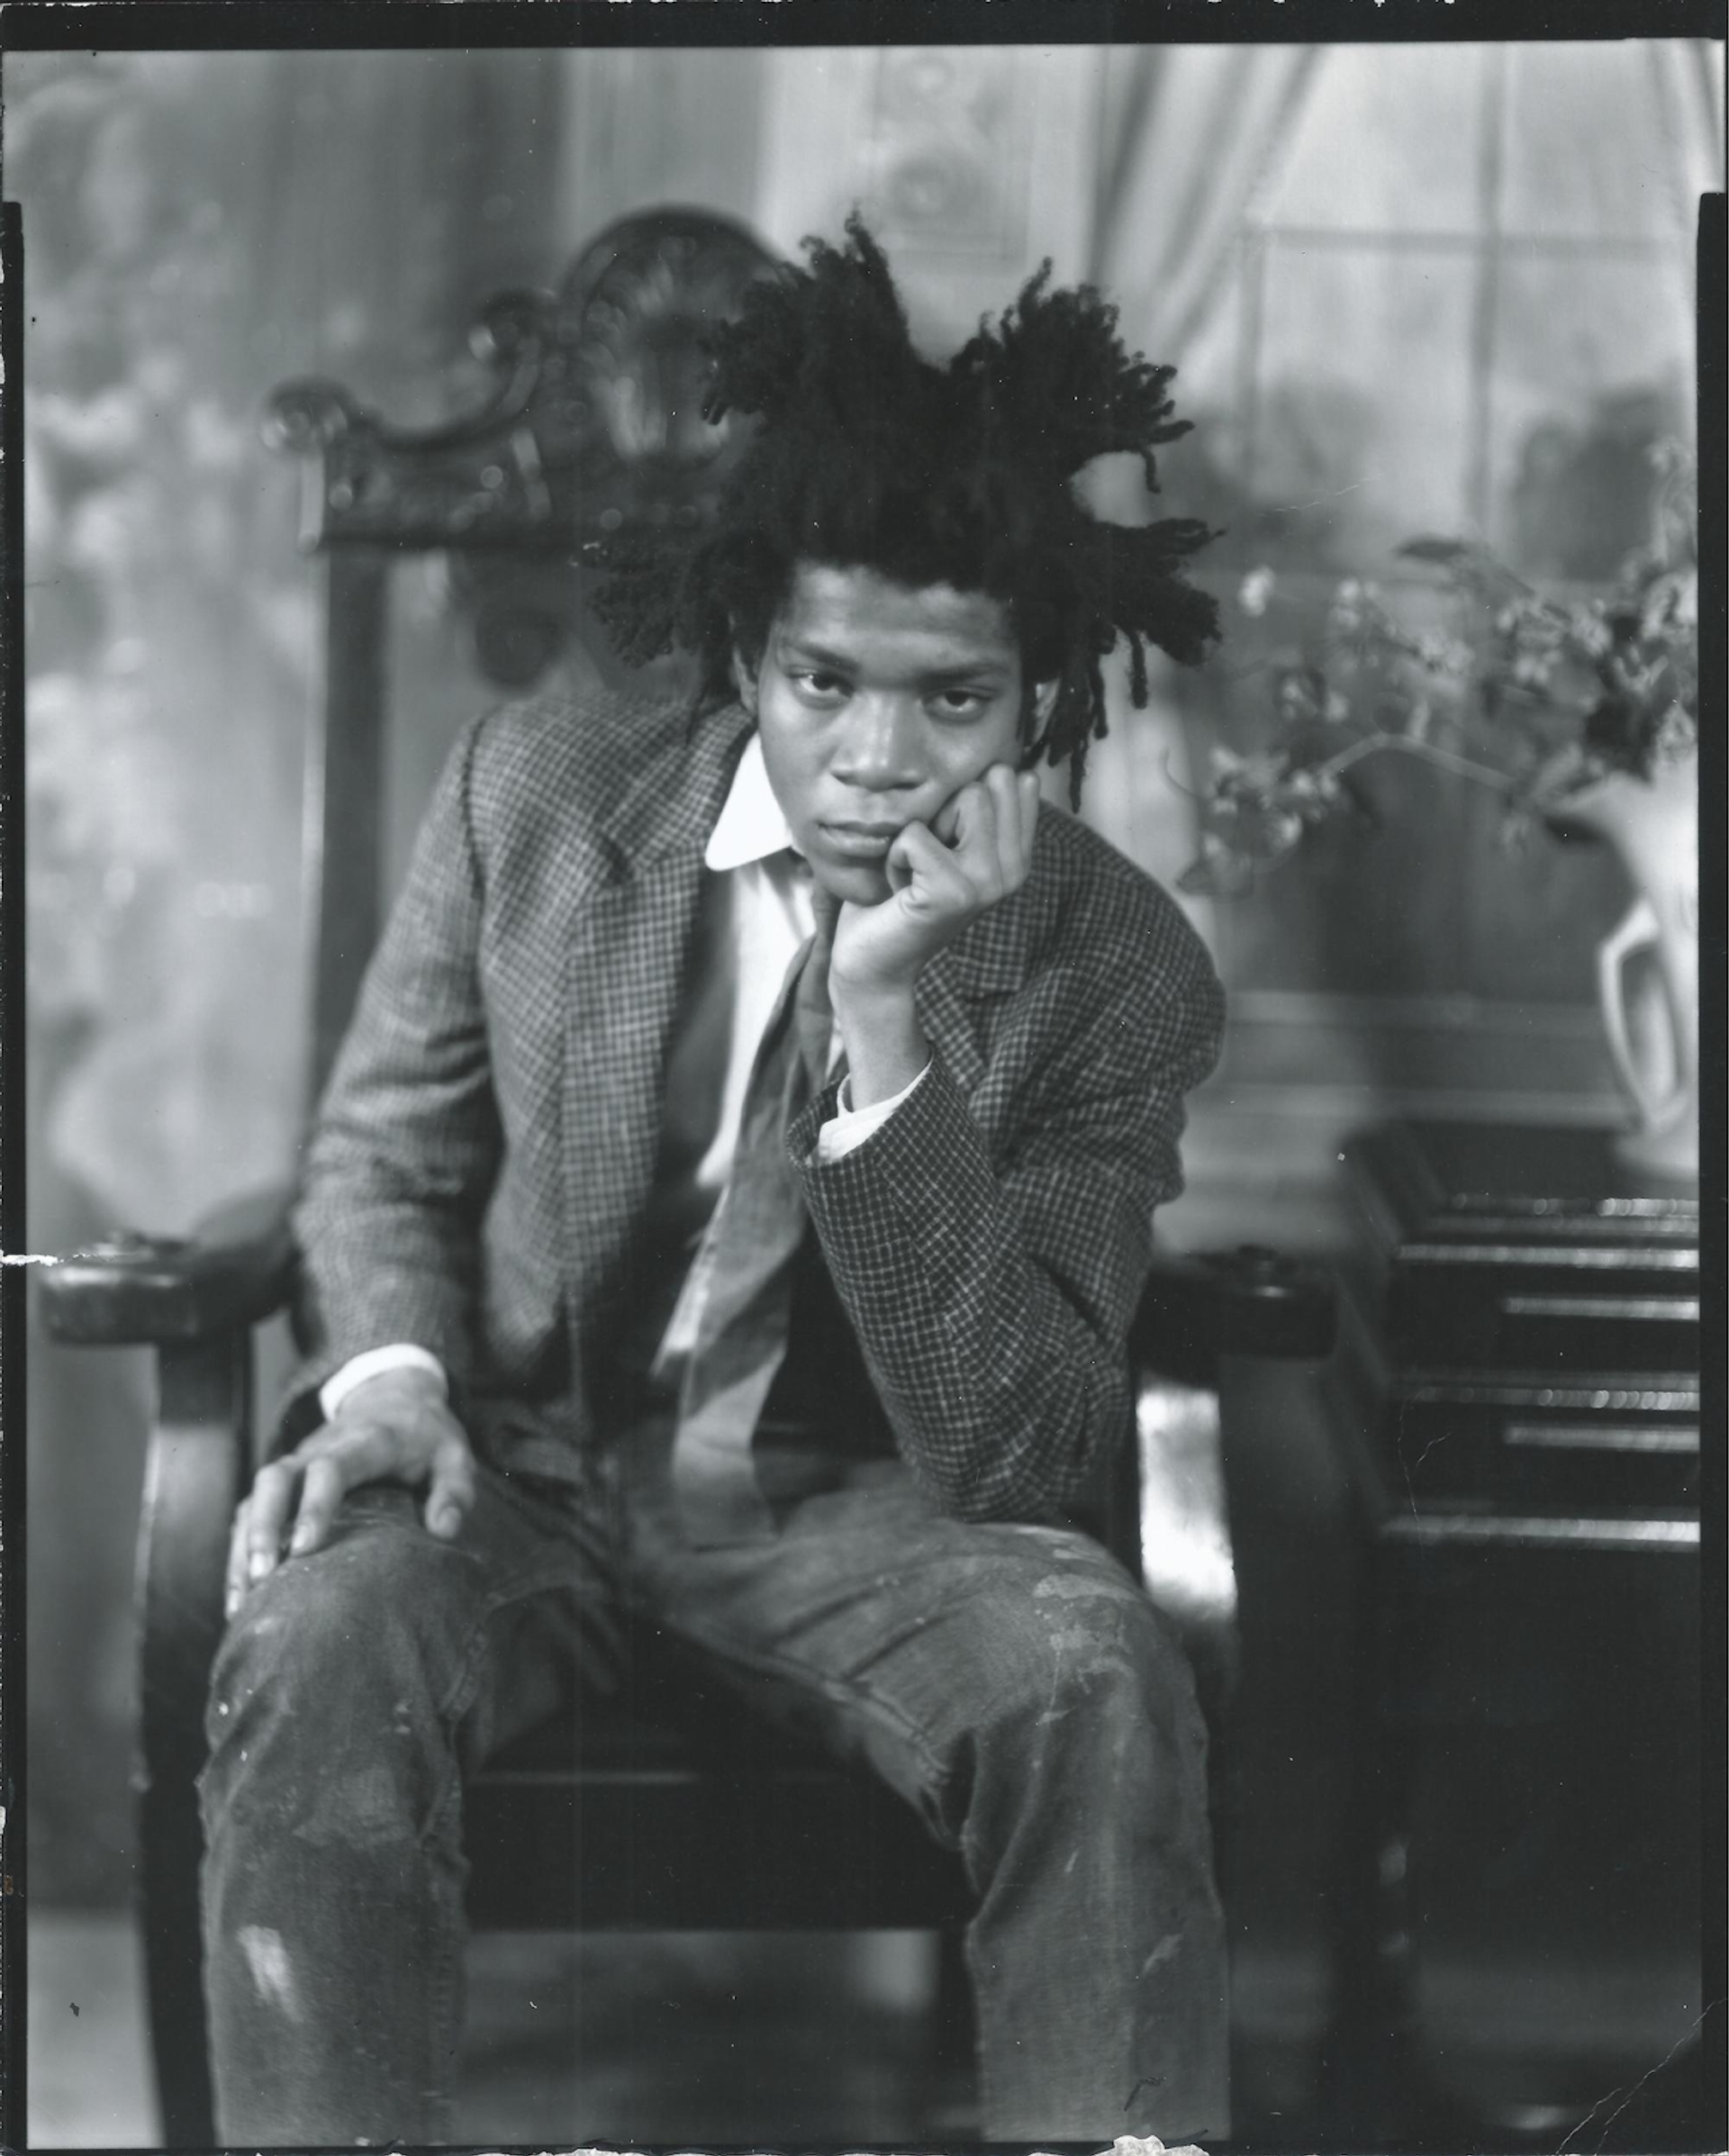 Black and white photograph of Jean-Michel Basquiat sitting on a chair.